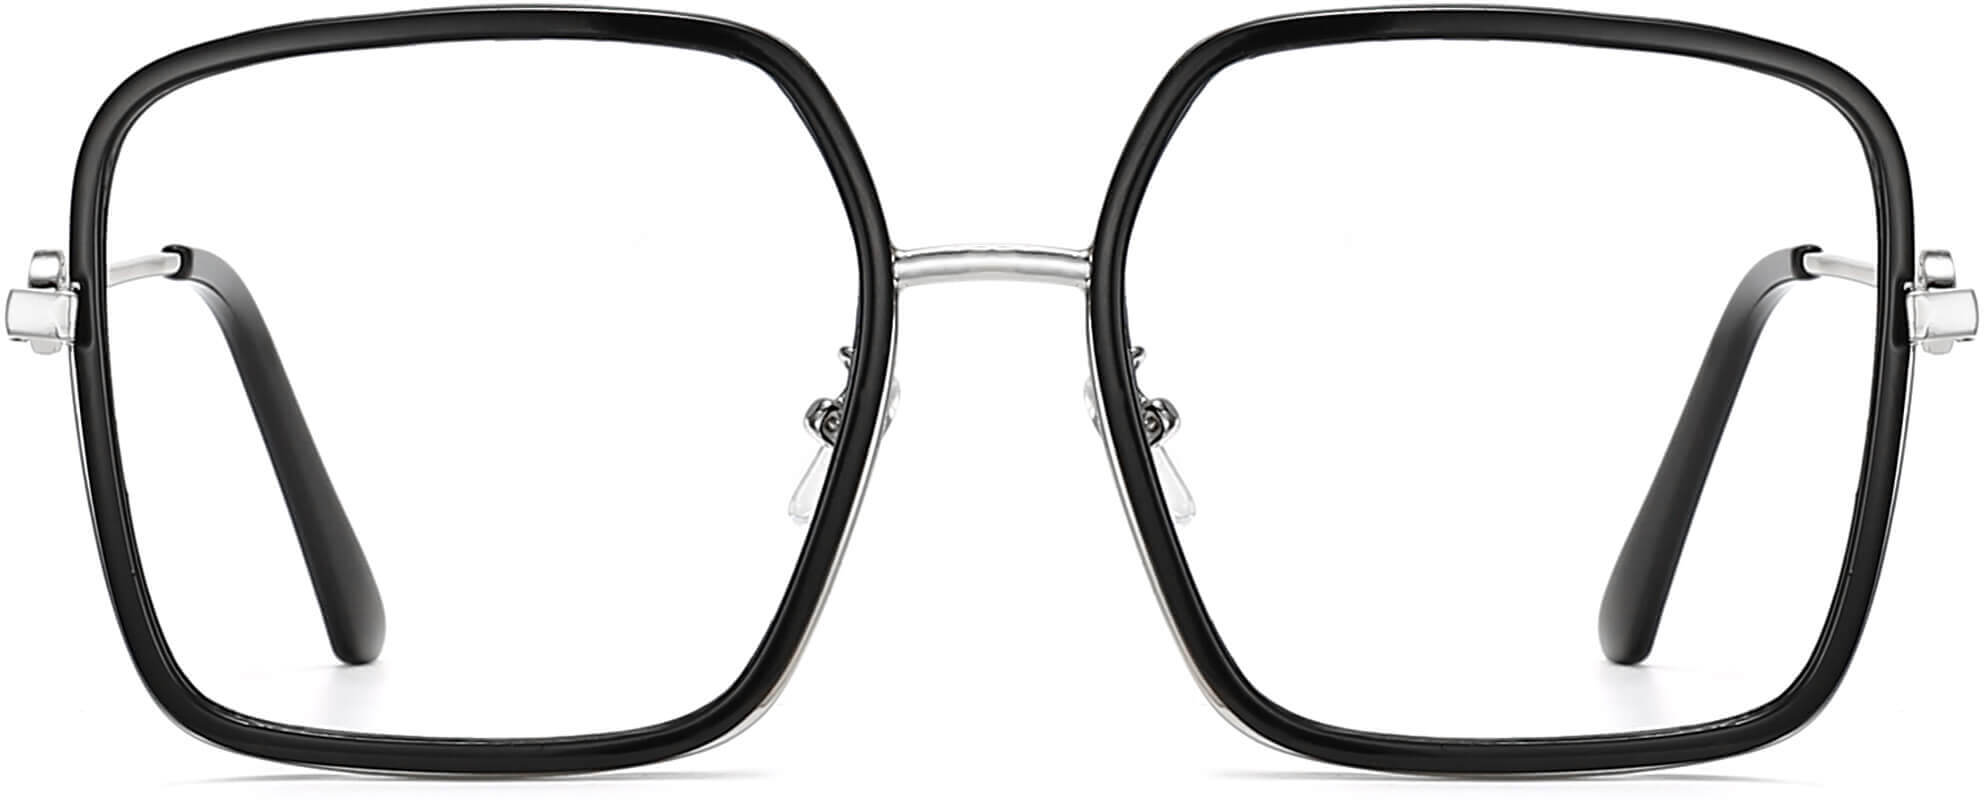 Esme Square Black Eyeglasses from ANRRI, front view